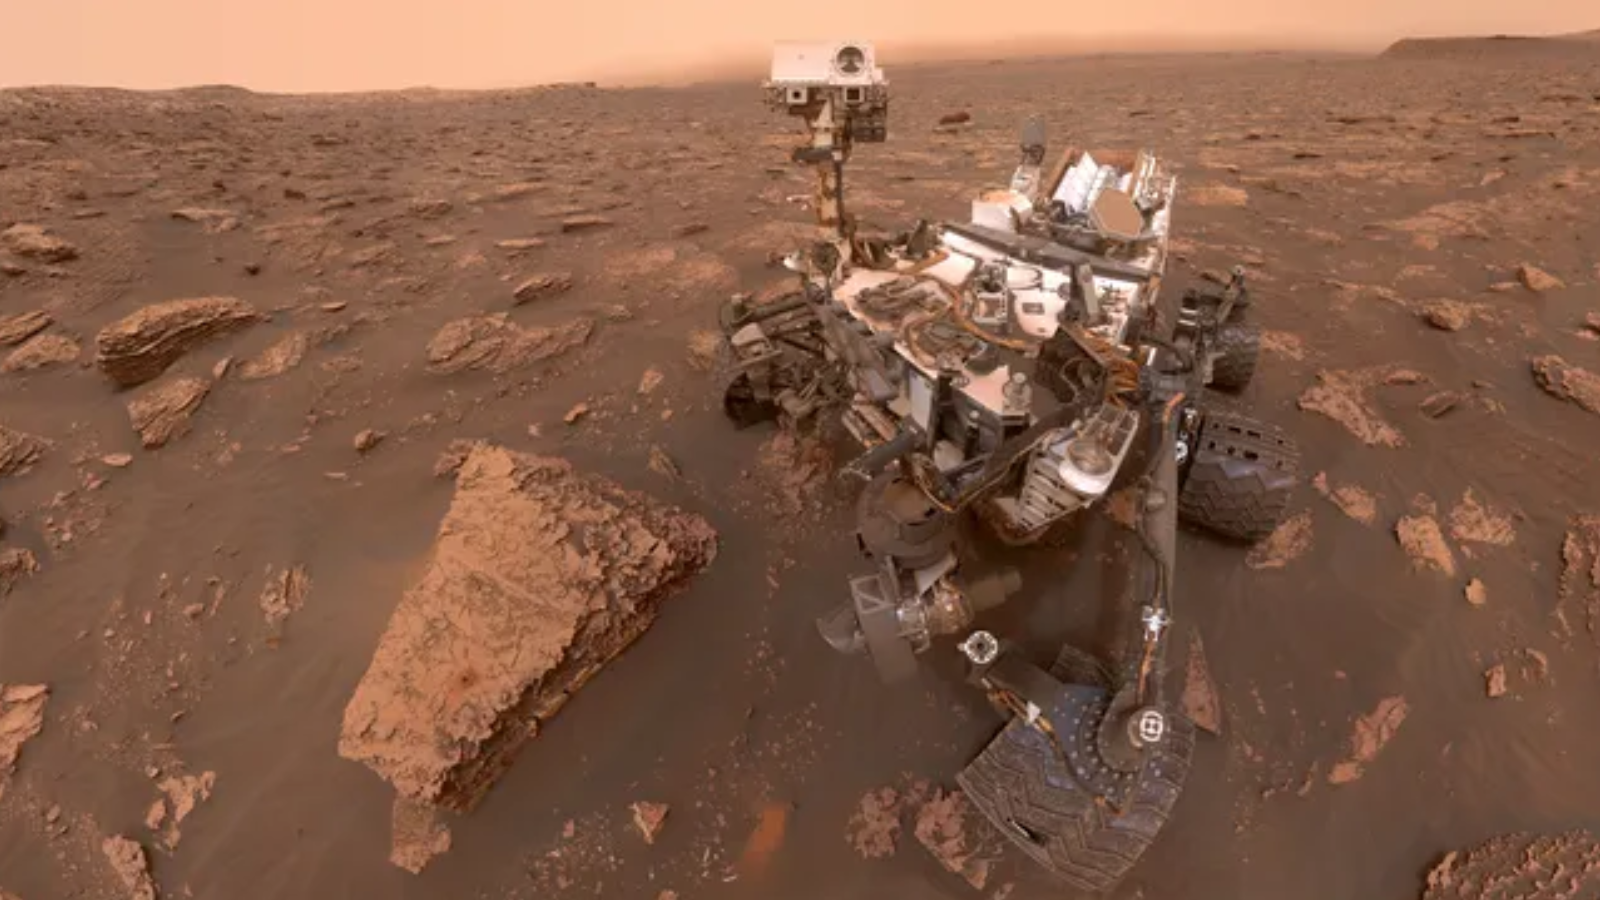 Curiosity rover may be ‘burping’ methane out of Mars’ subsurface Space